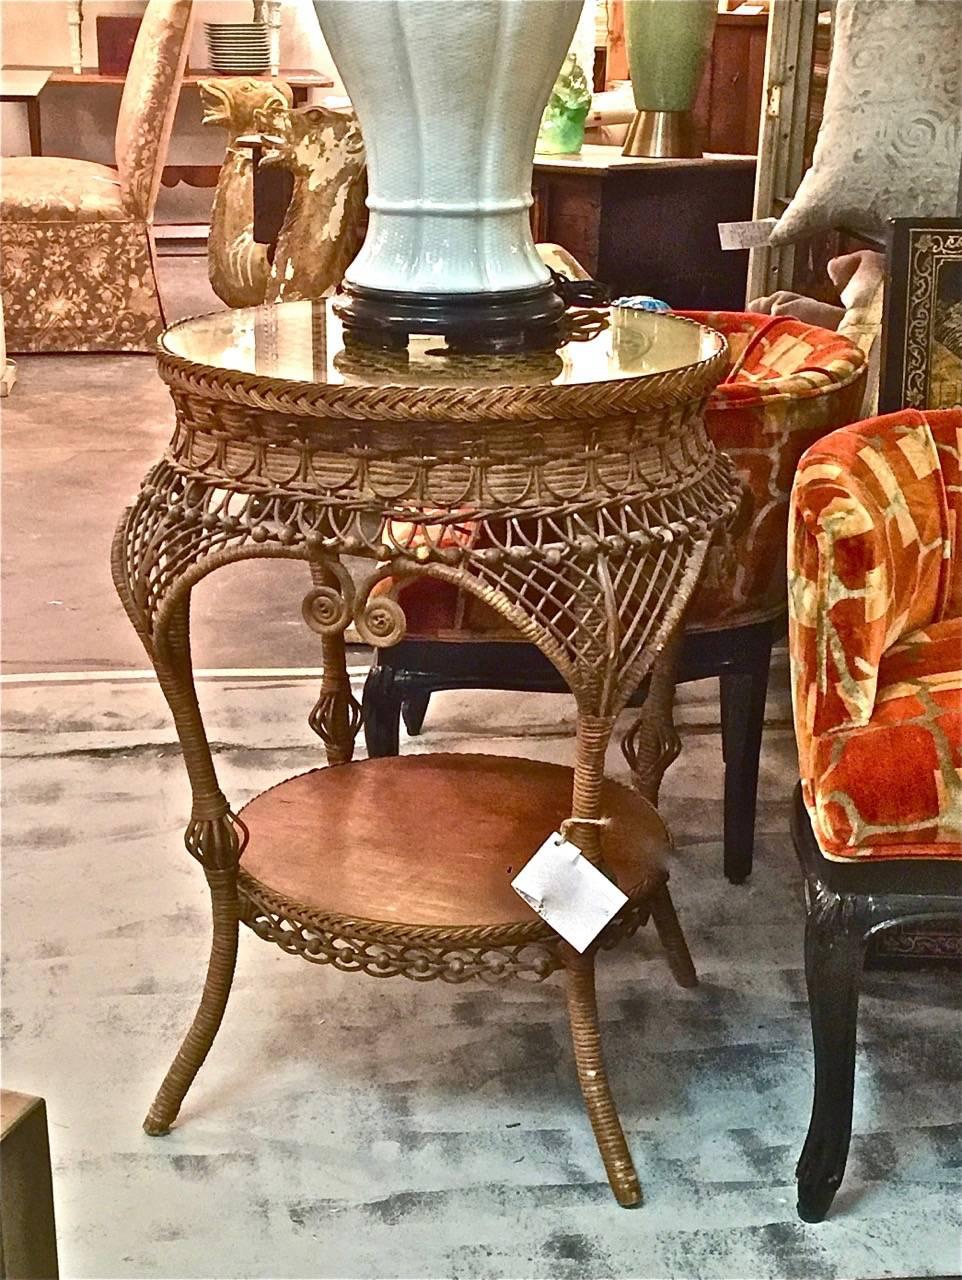 This is a great Heywood-Wakefield side table that dates to the early 20th century. The table is in excellent original condition and features a beautifully caned, lace design top, sexy curvy legs, wooden beading and lower shelf.